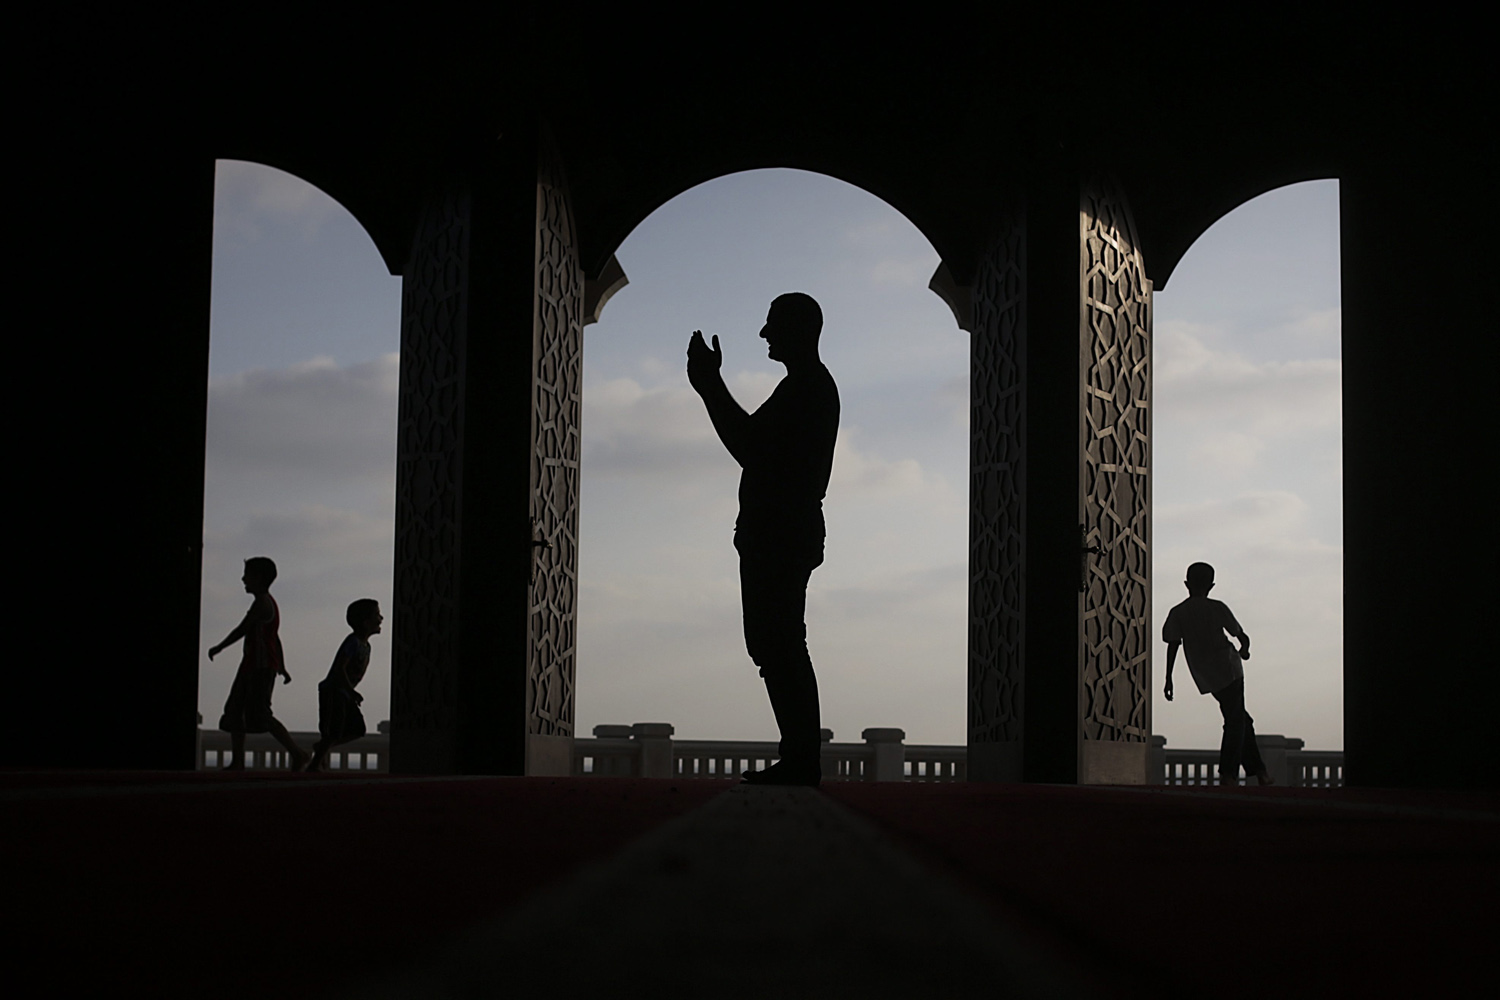 July 12, 2013. A Palestinian man prays in a mosque during the holy month of Ramadan in Gaza City, Gaza Strip.